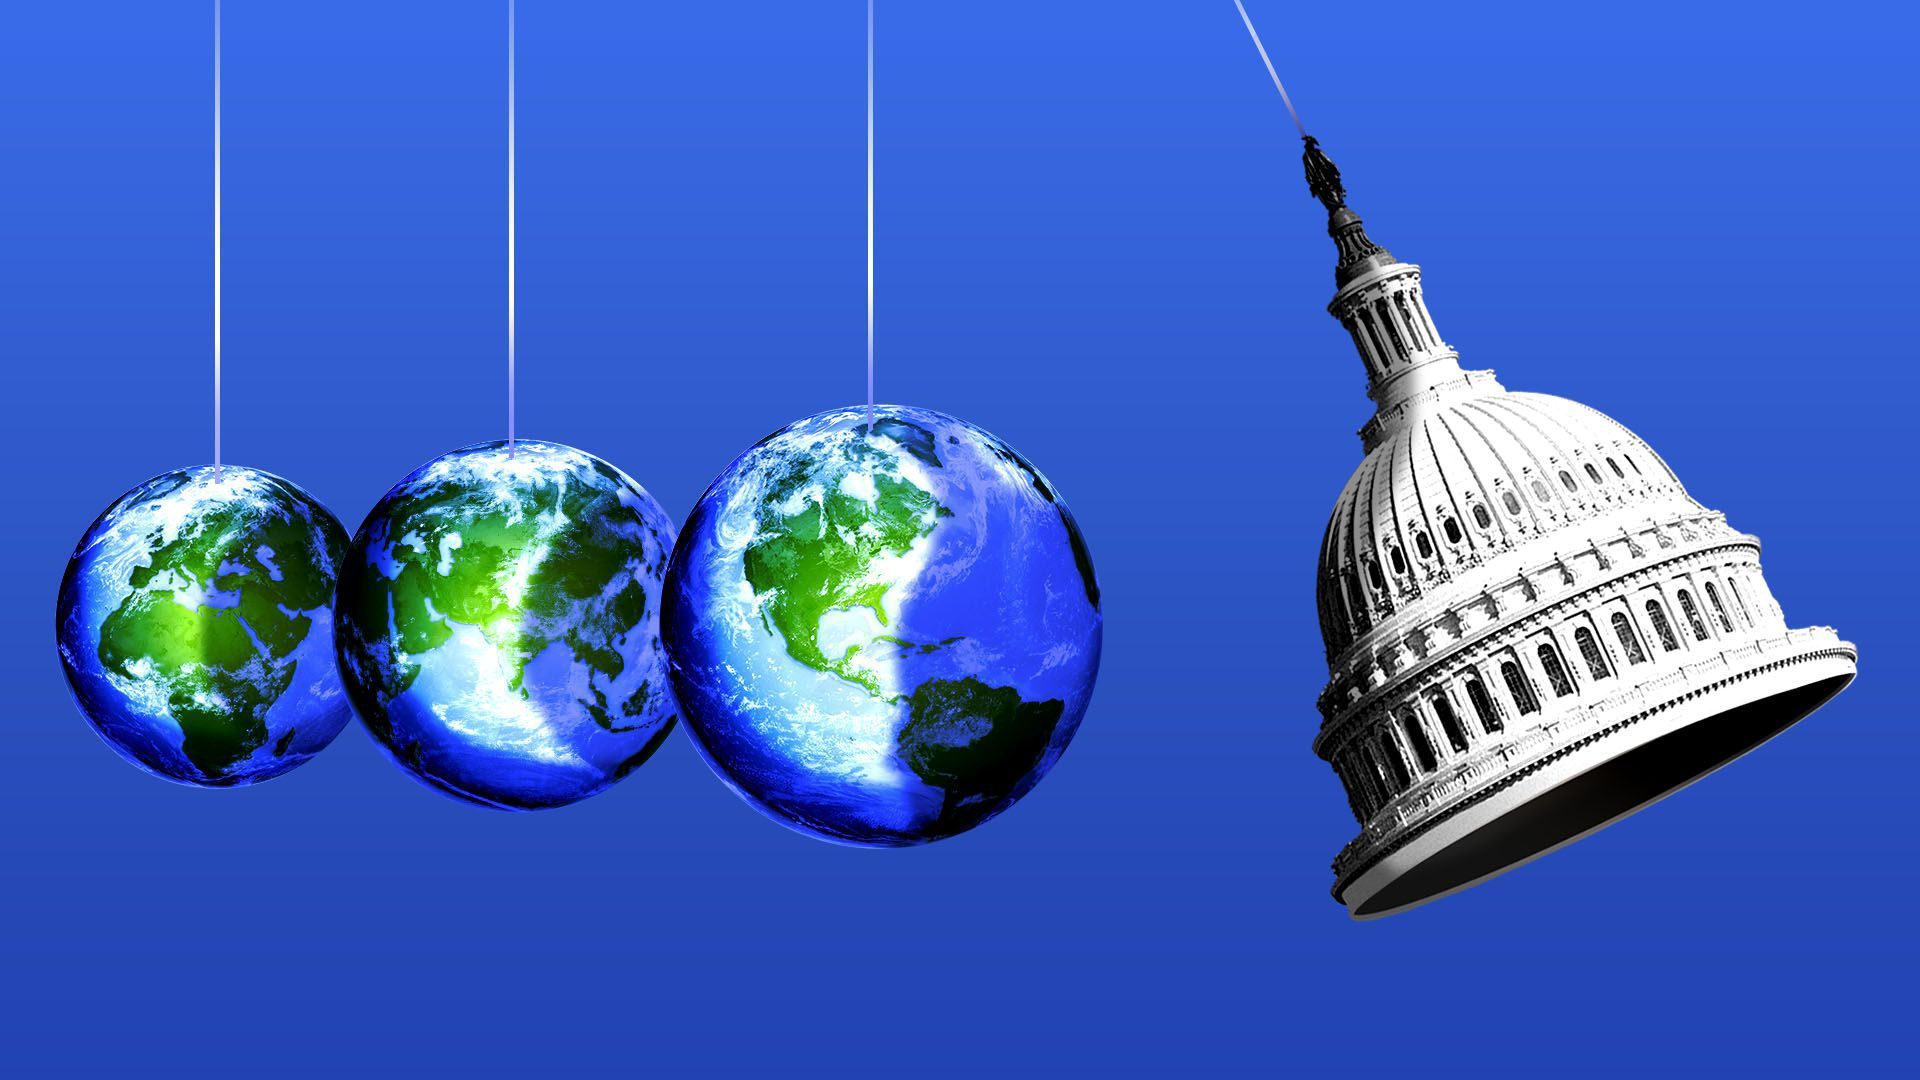 Several globes, hanging from a string, symbolizing climate change and Congress